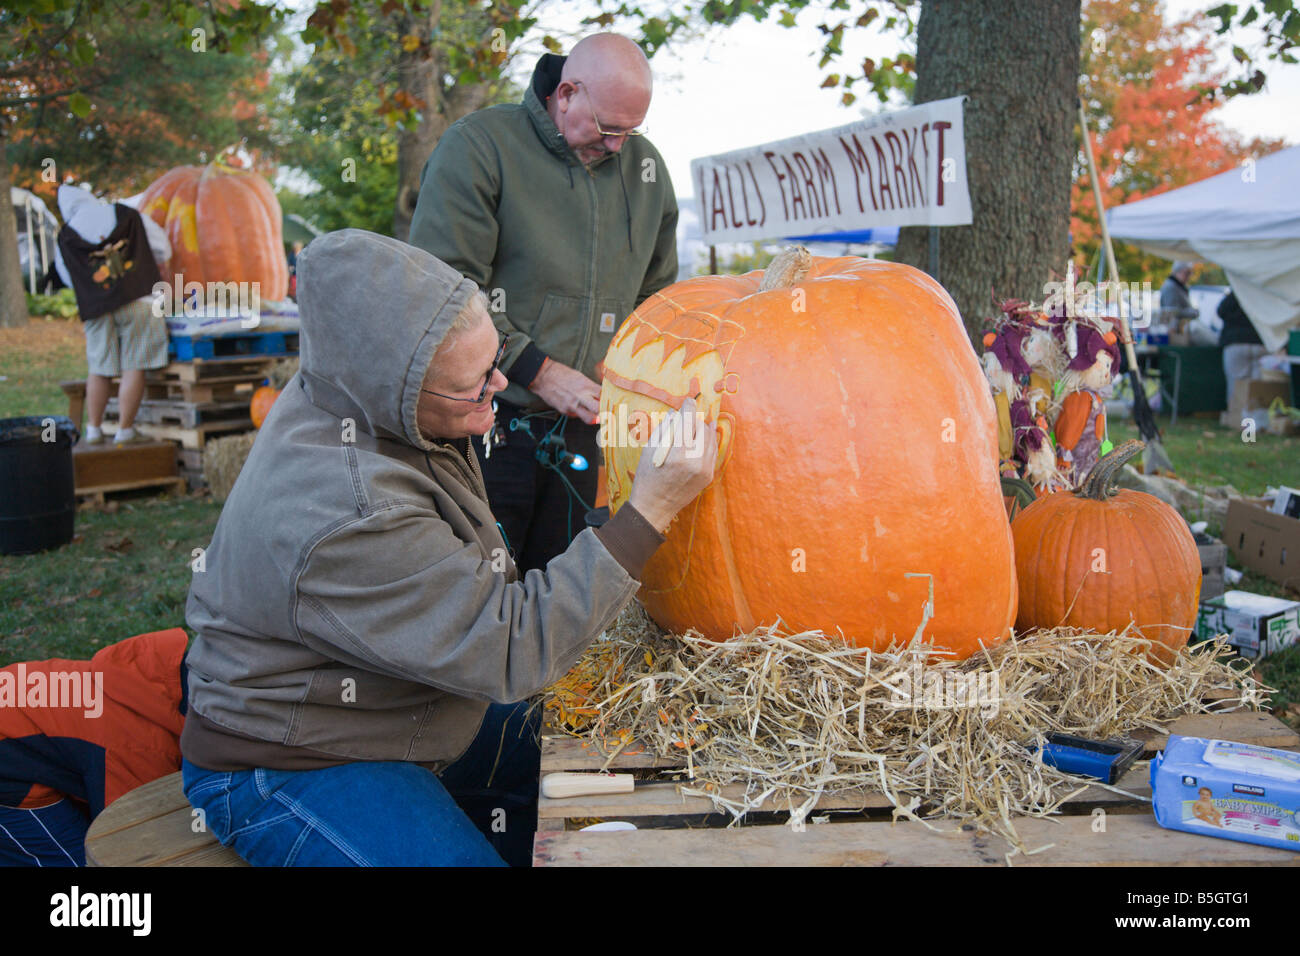 A woman from Nalls Farm Market carves a pumpkin at the 2008 Shenandoah Valley Hot Air Balloon and Wine Festival in Virginia. Stock Photo